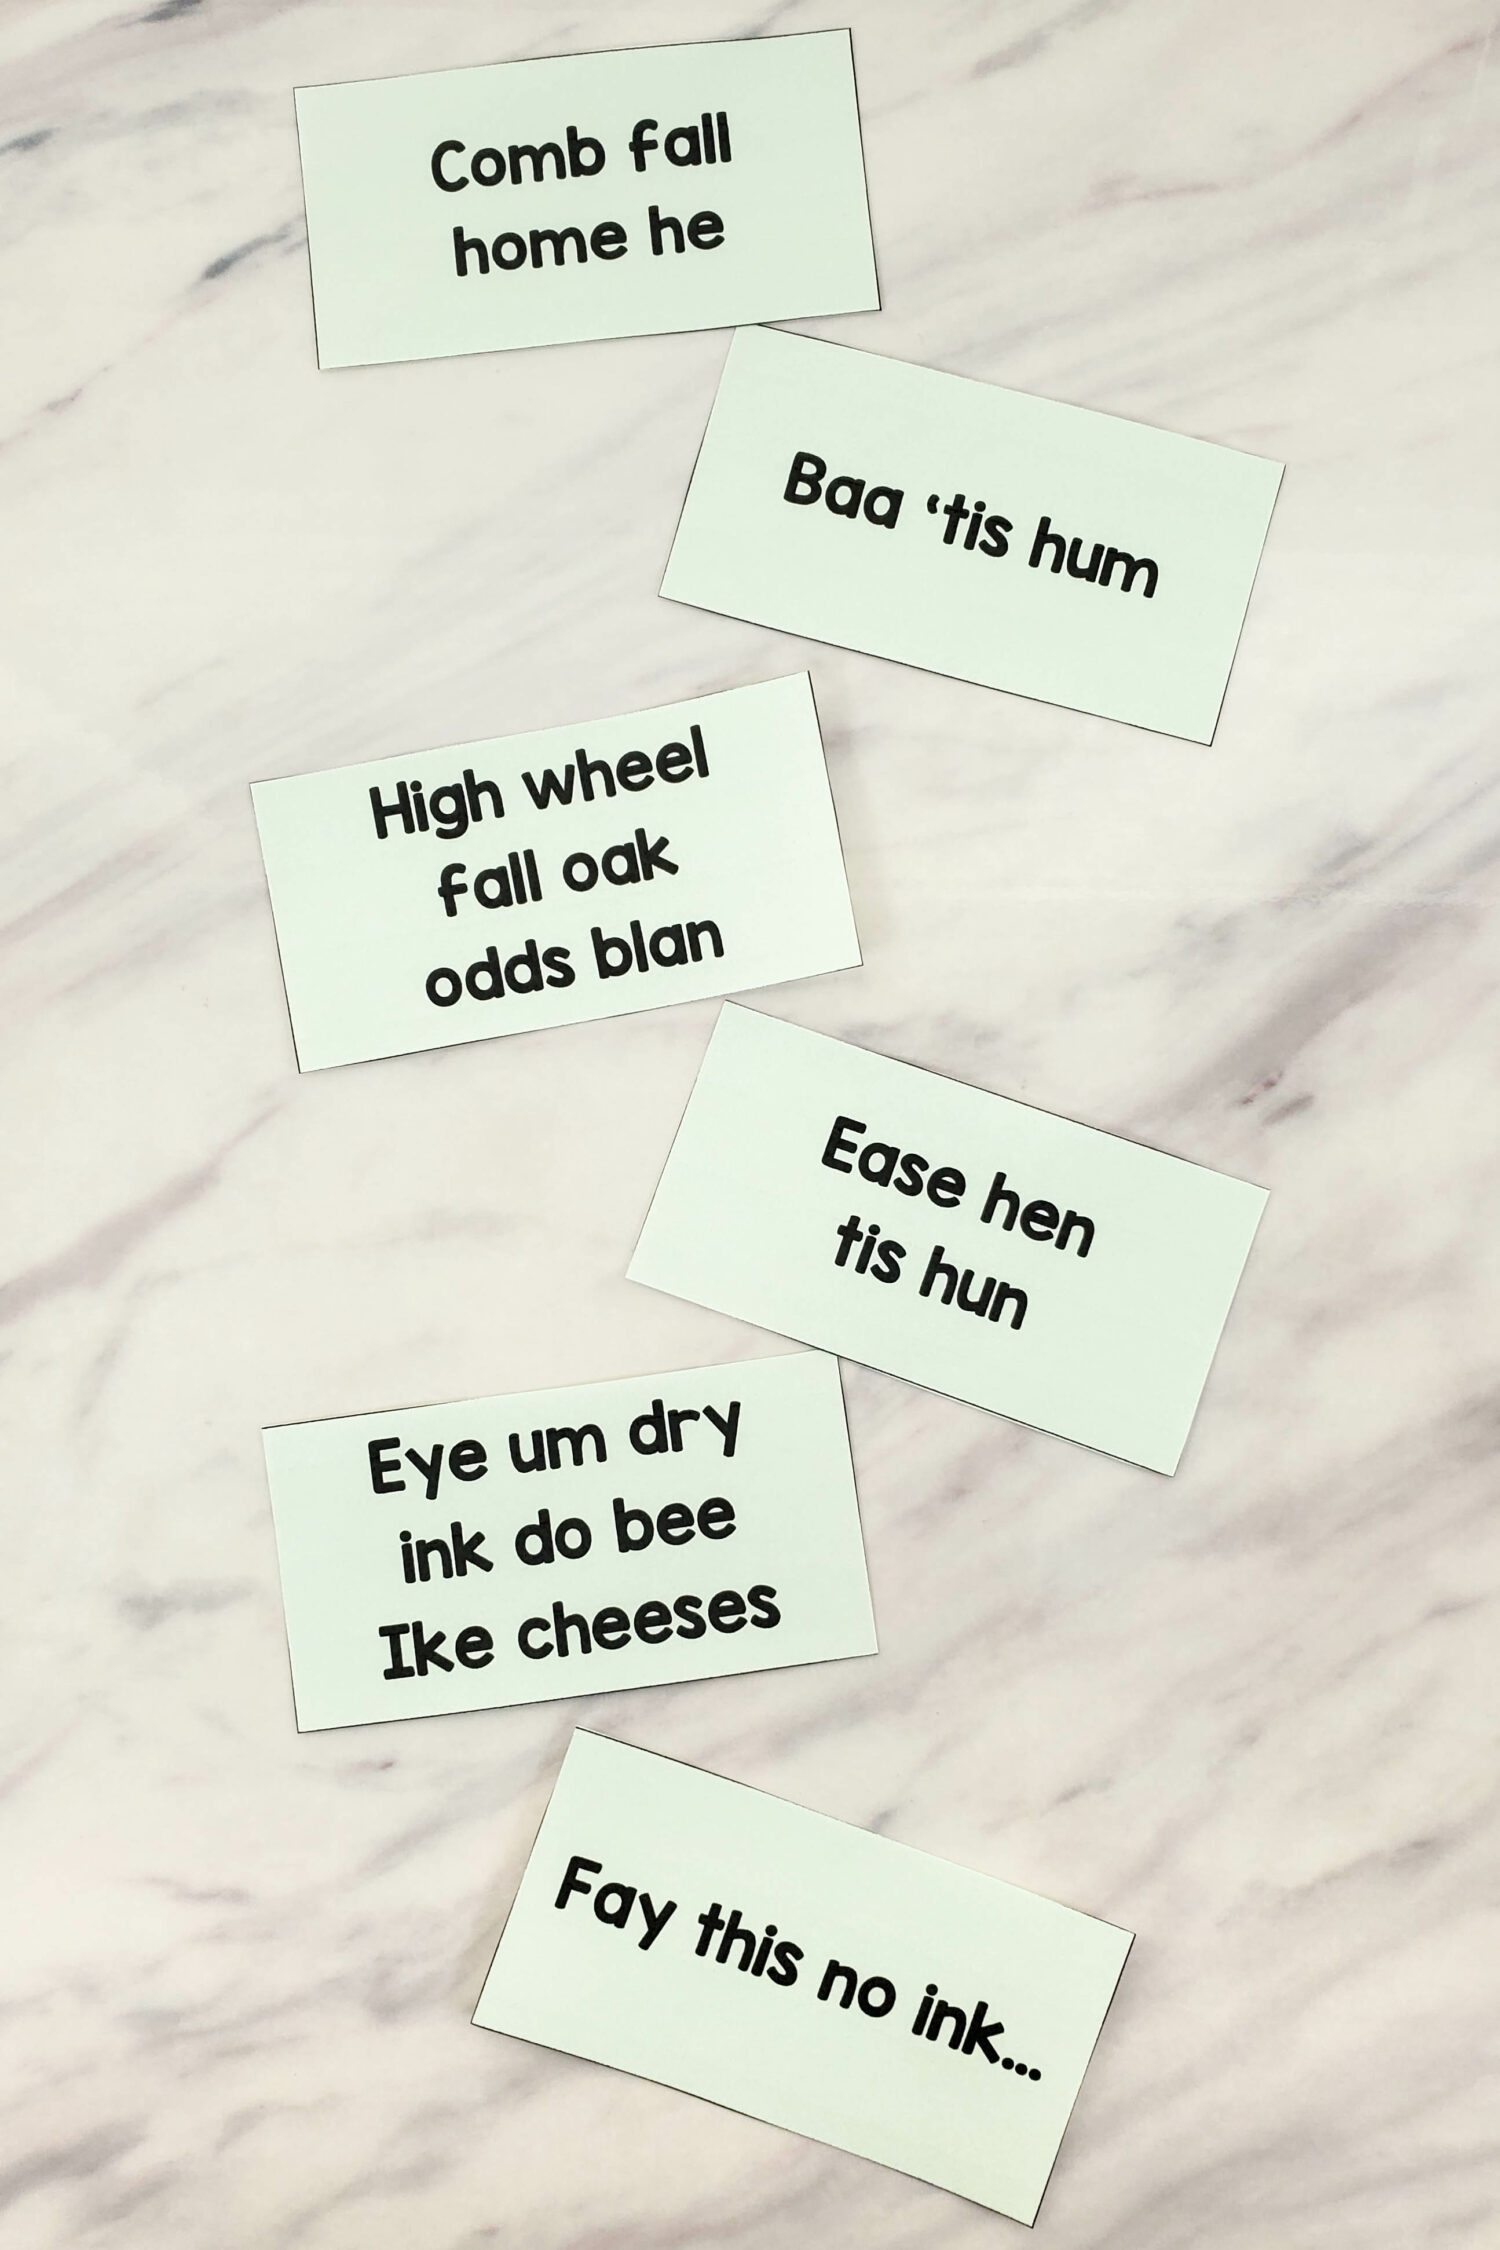 Primary Song Mumbles Mad Gab - Tons of fun silly phrases to say to help the kids decode the song to sing next! A great way to review a mix of songs or introduce new songs for the year. Printable song helps for LDS Primary music leaders.